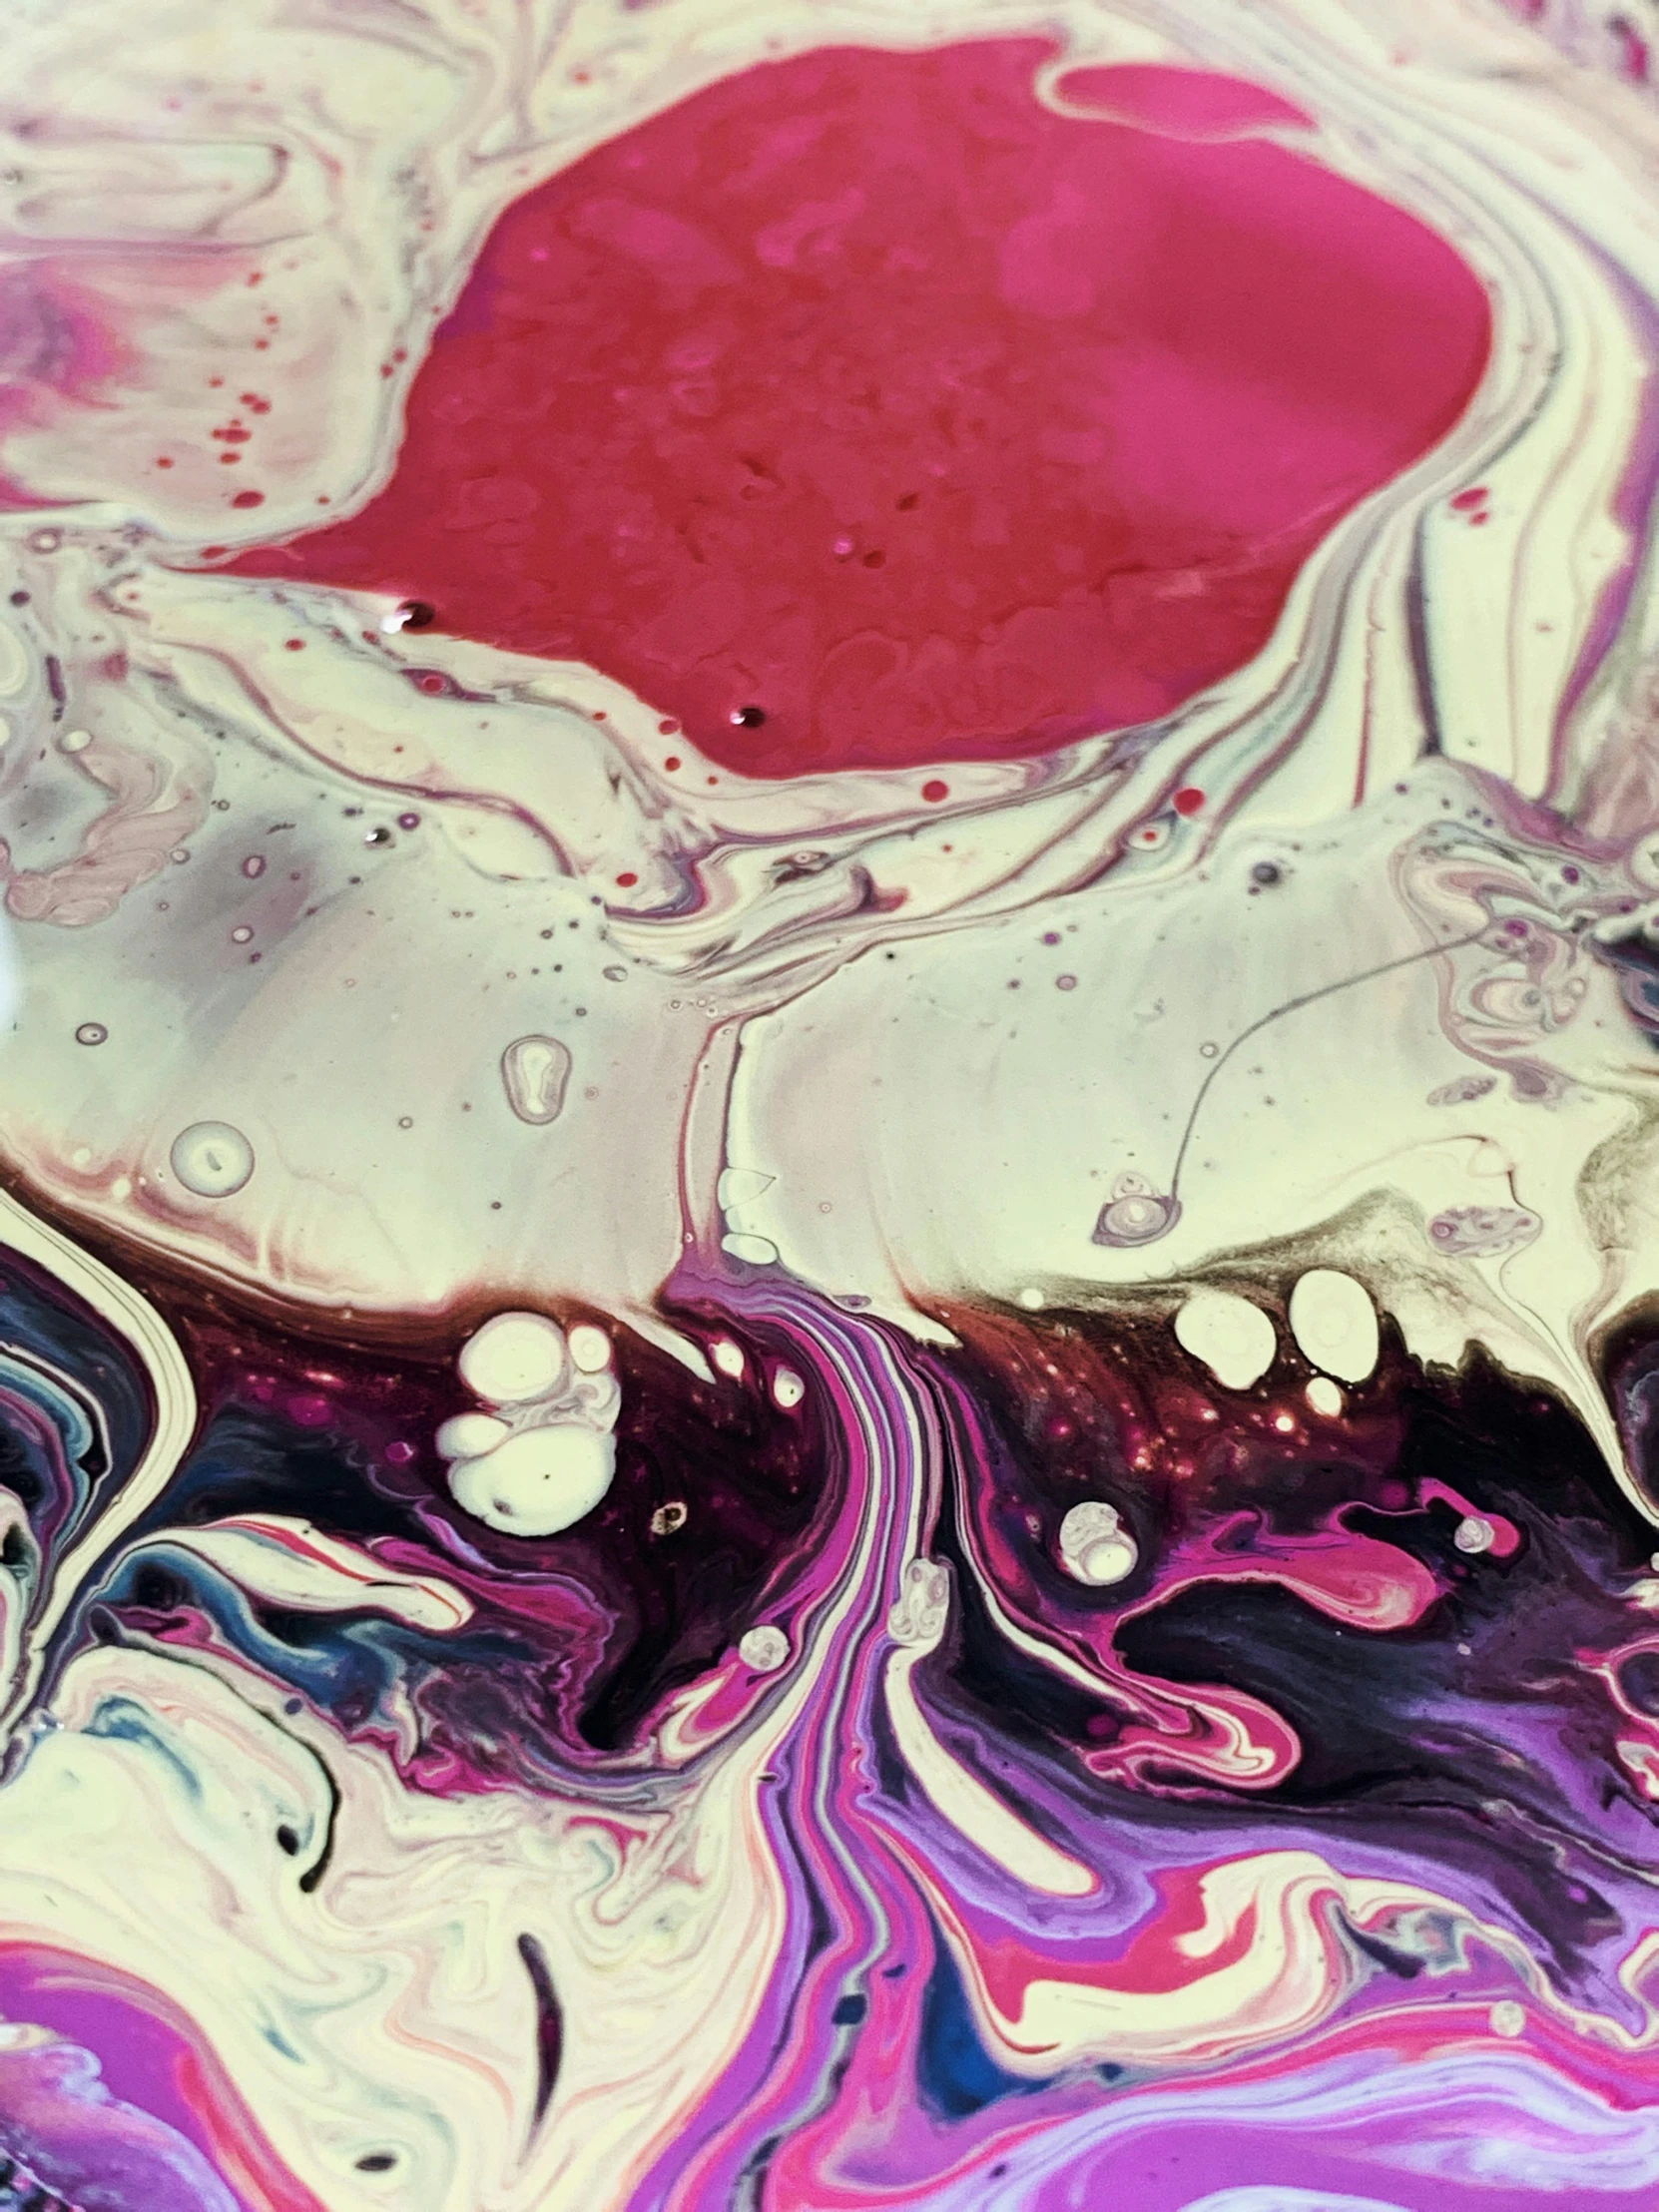 a close up of a liquid painting on a surface, inspired by Shōzō Shimamoto, trending on unsplash, purple and red, silver dechroic details, album cover, flowing milk